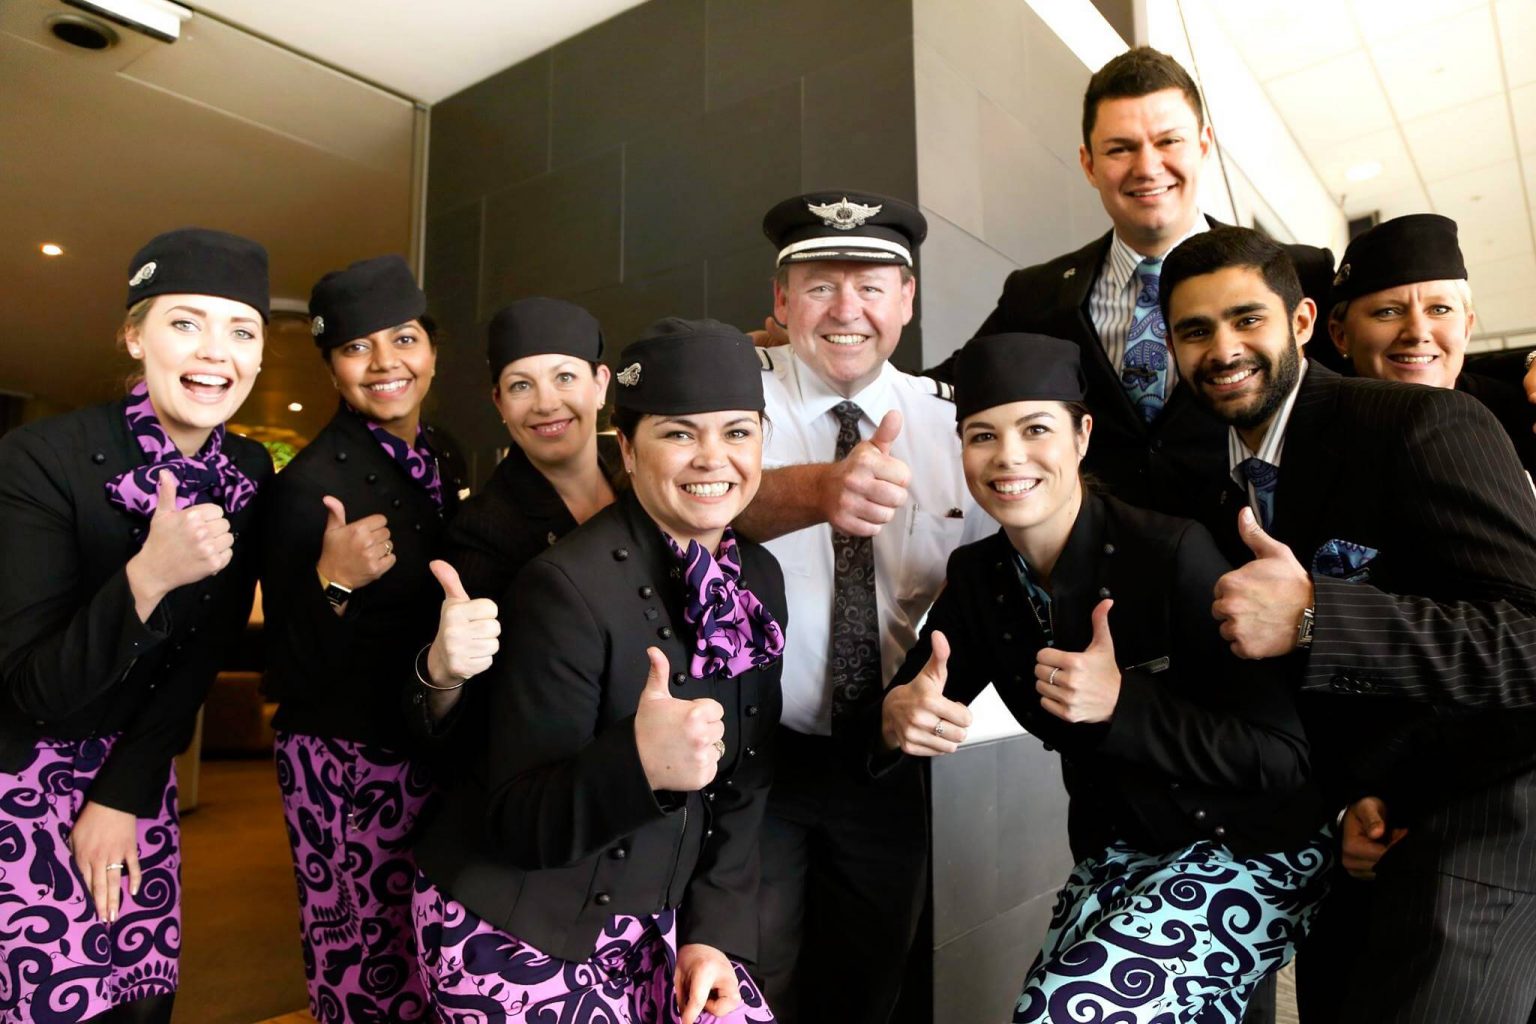 ifly staff travel air new zealand